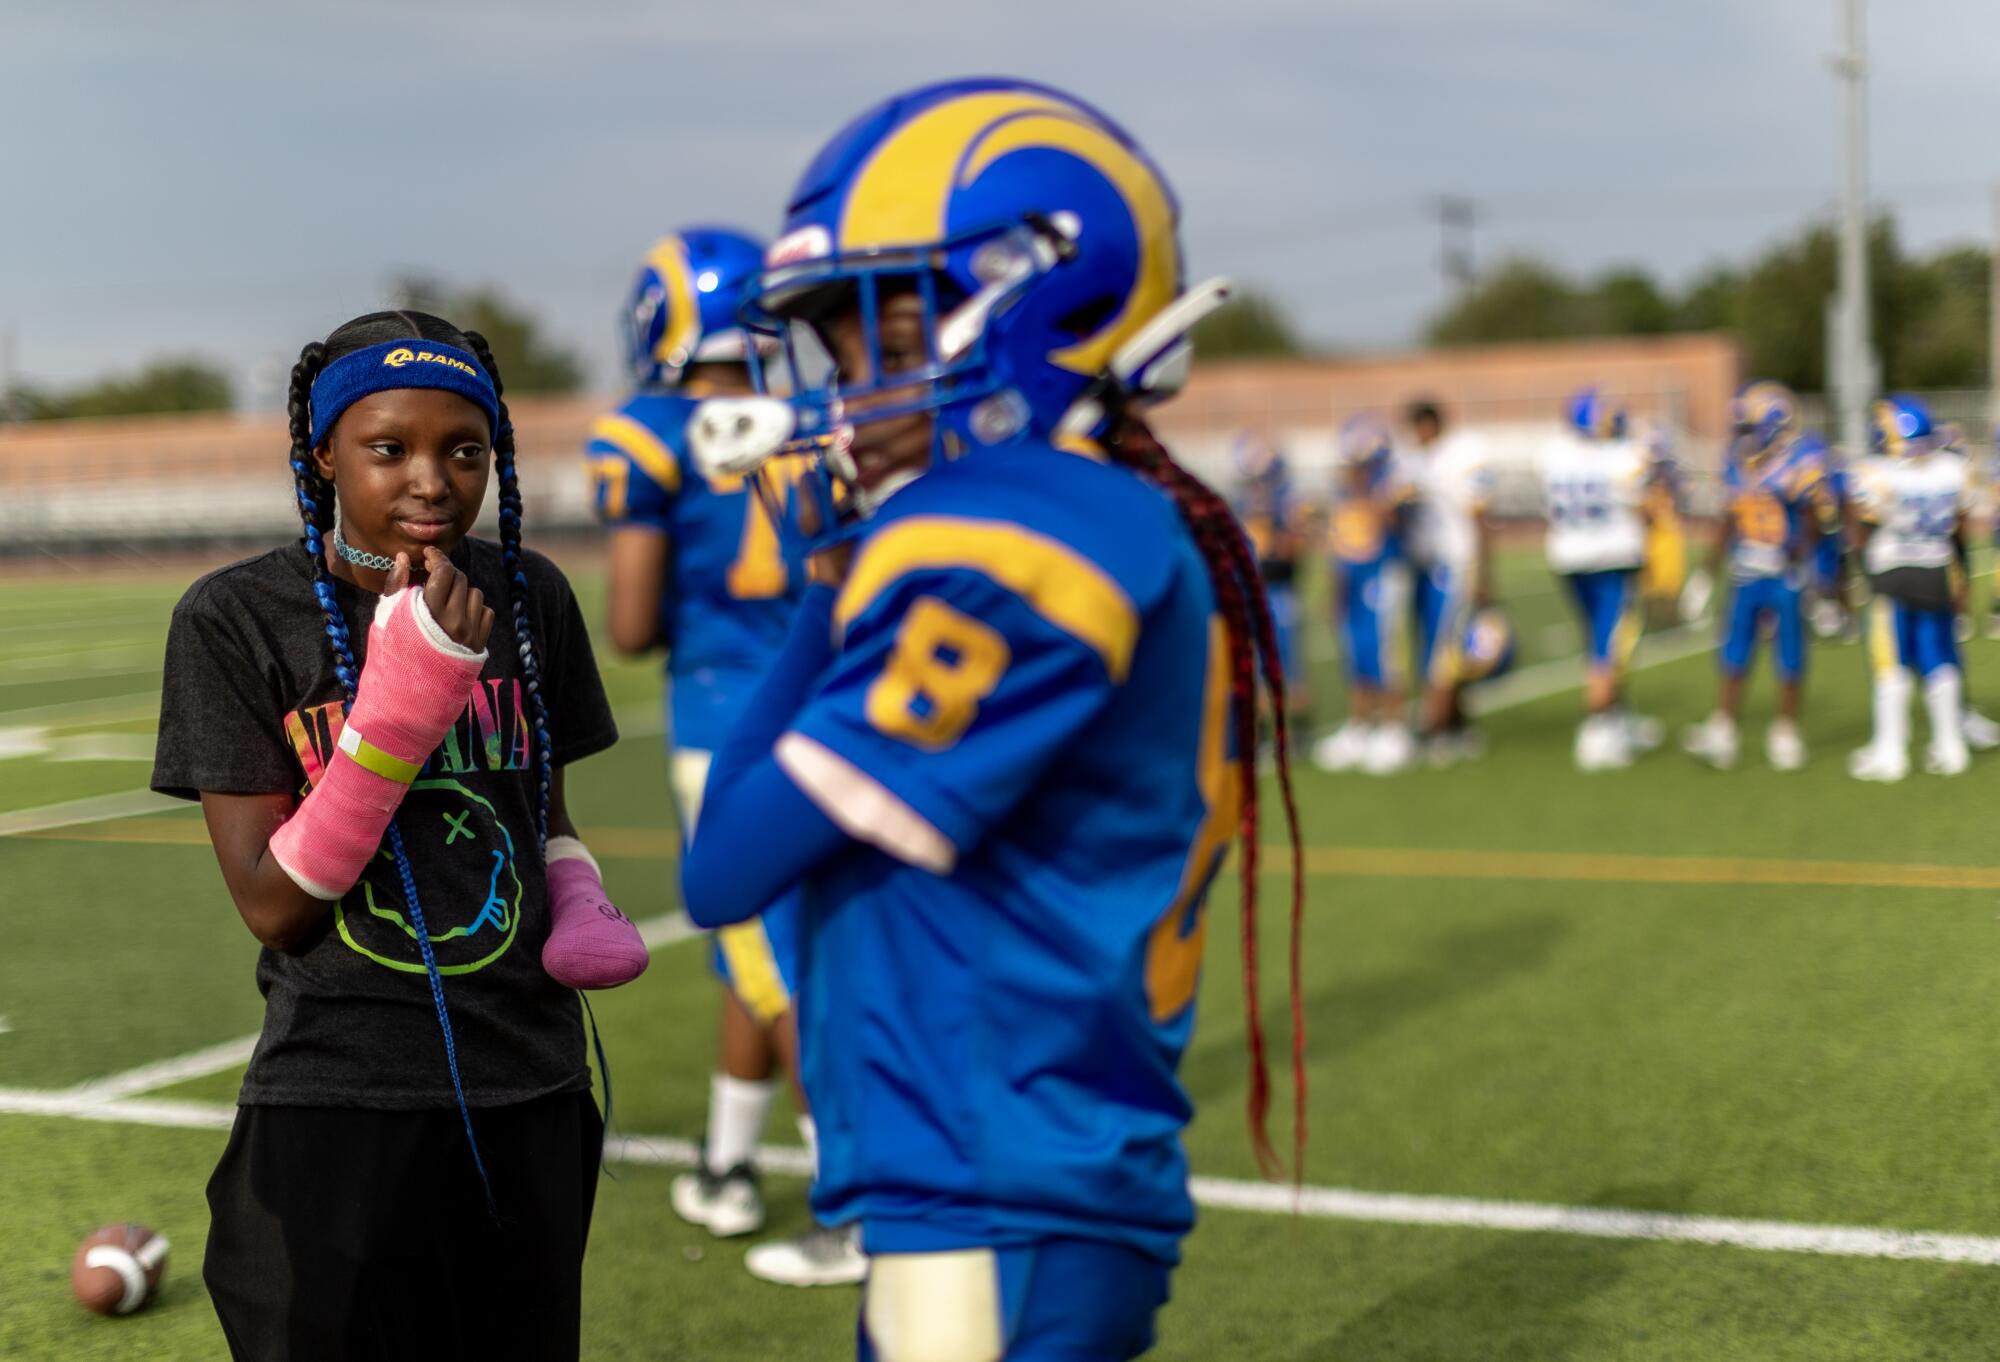 With both arms fitted with casts, La'Veyah Mosley, 12, left, watches her twin sister La'Viyah 